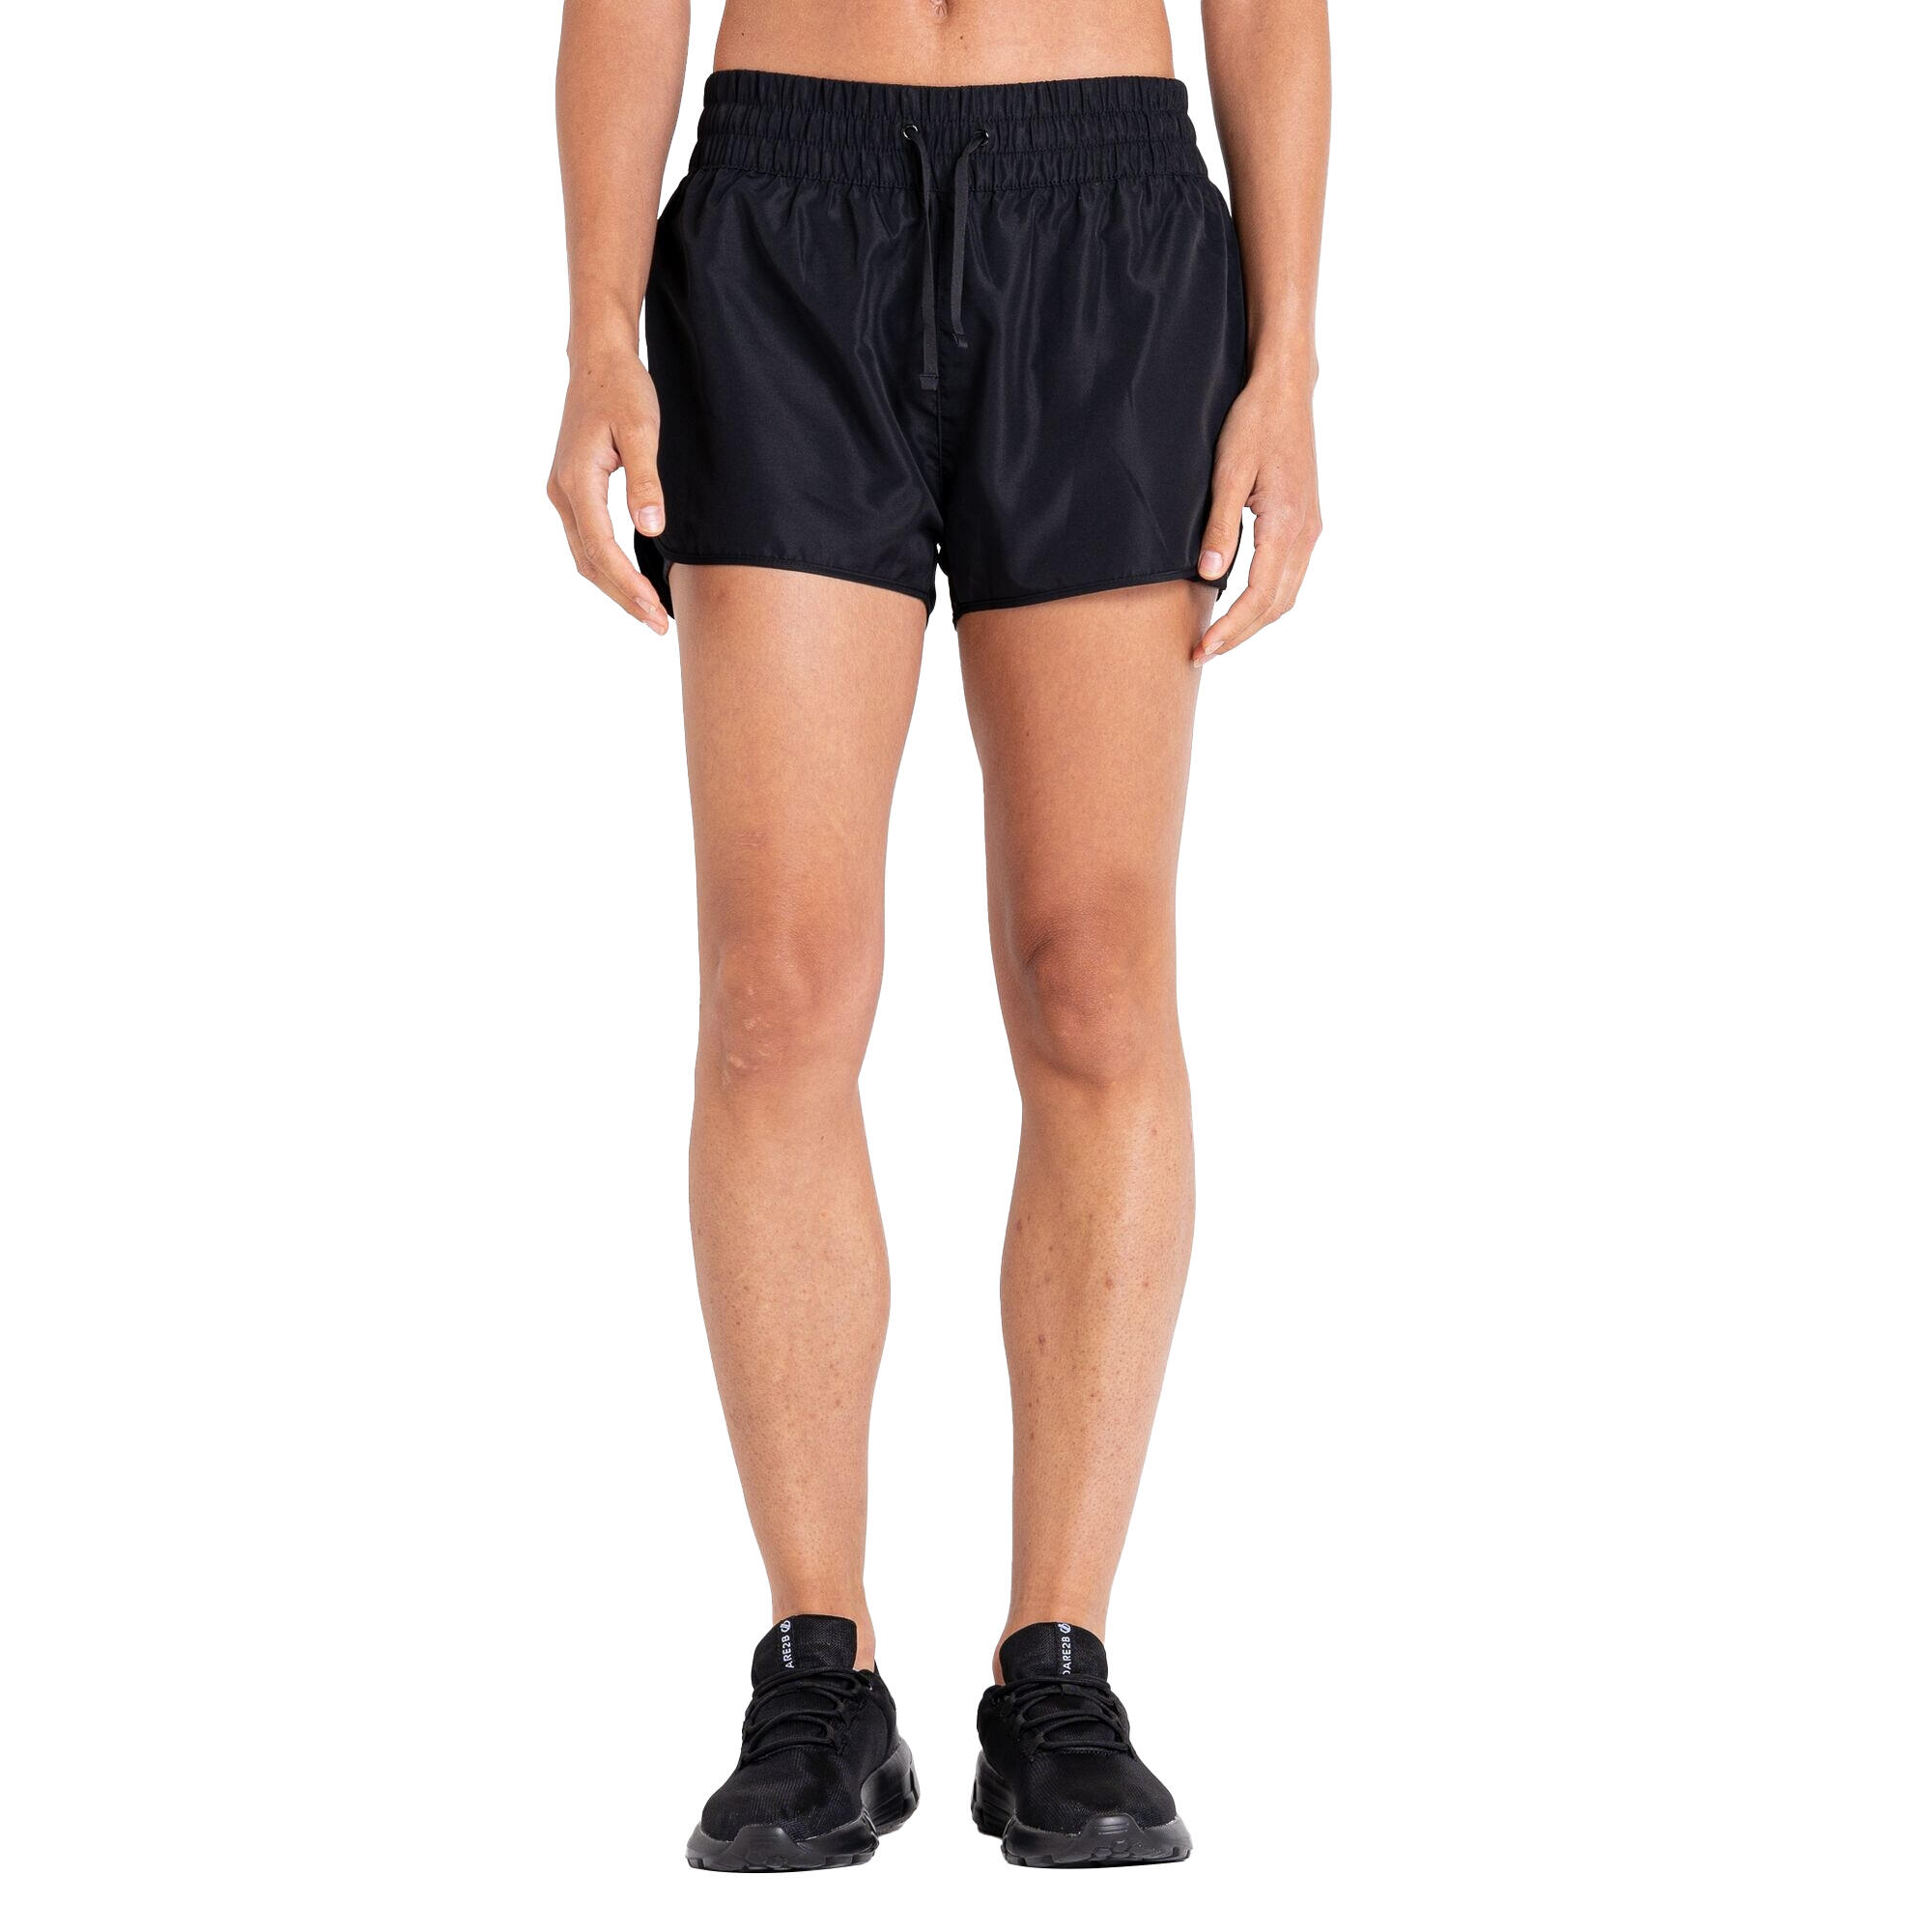 Womens/Ladies The Laura Whitmore Edit Sprint Up 2 in 1 Shorts (Black) 3/5